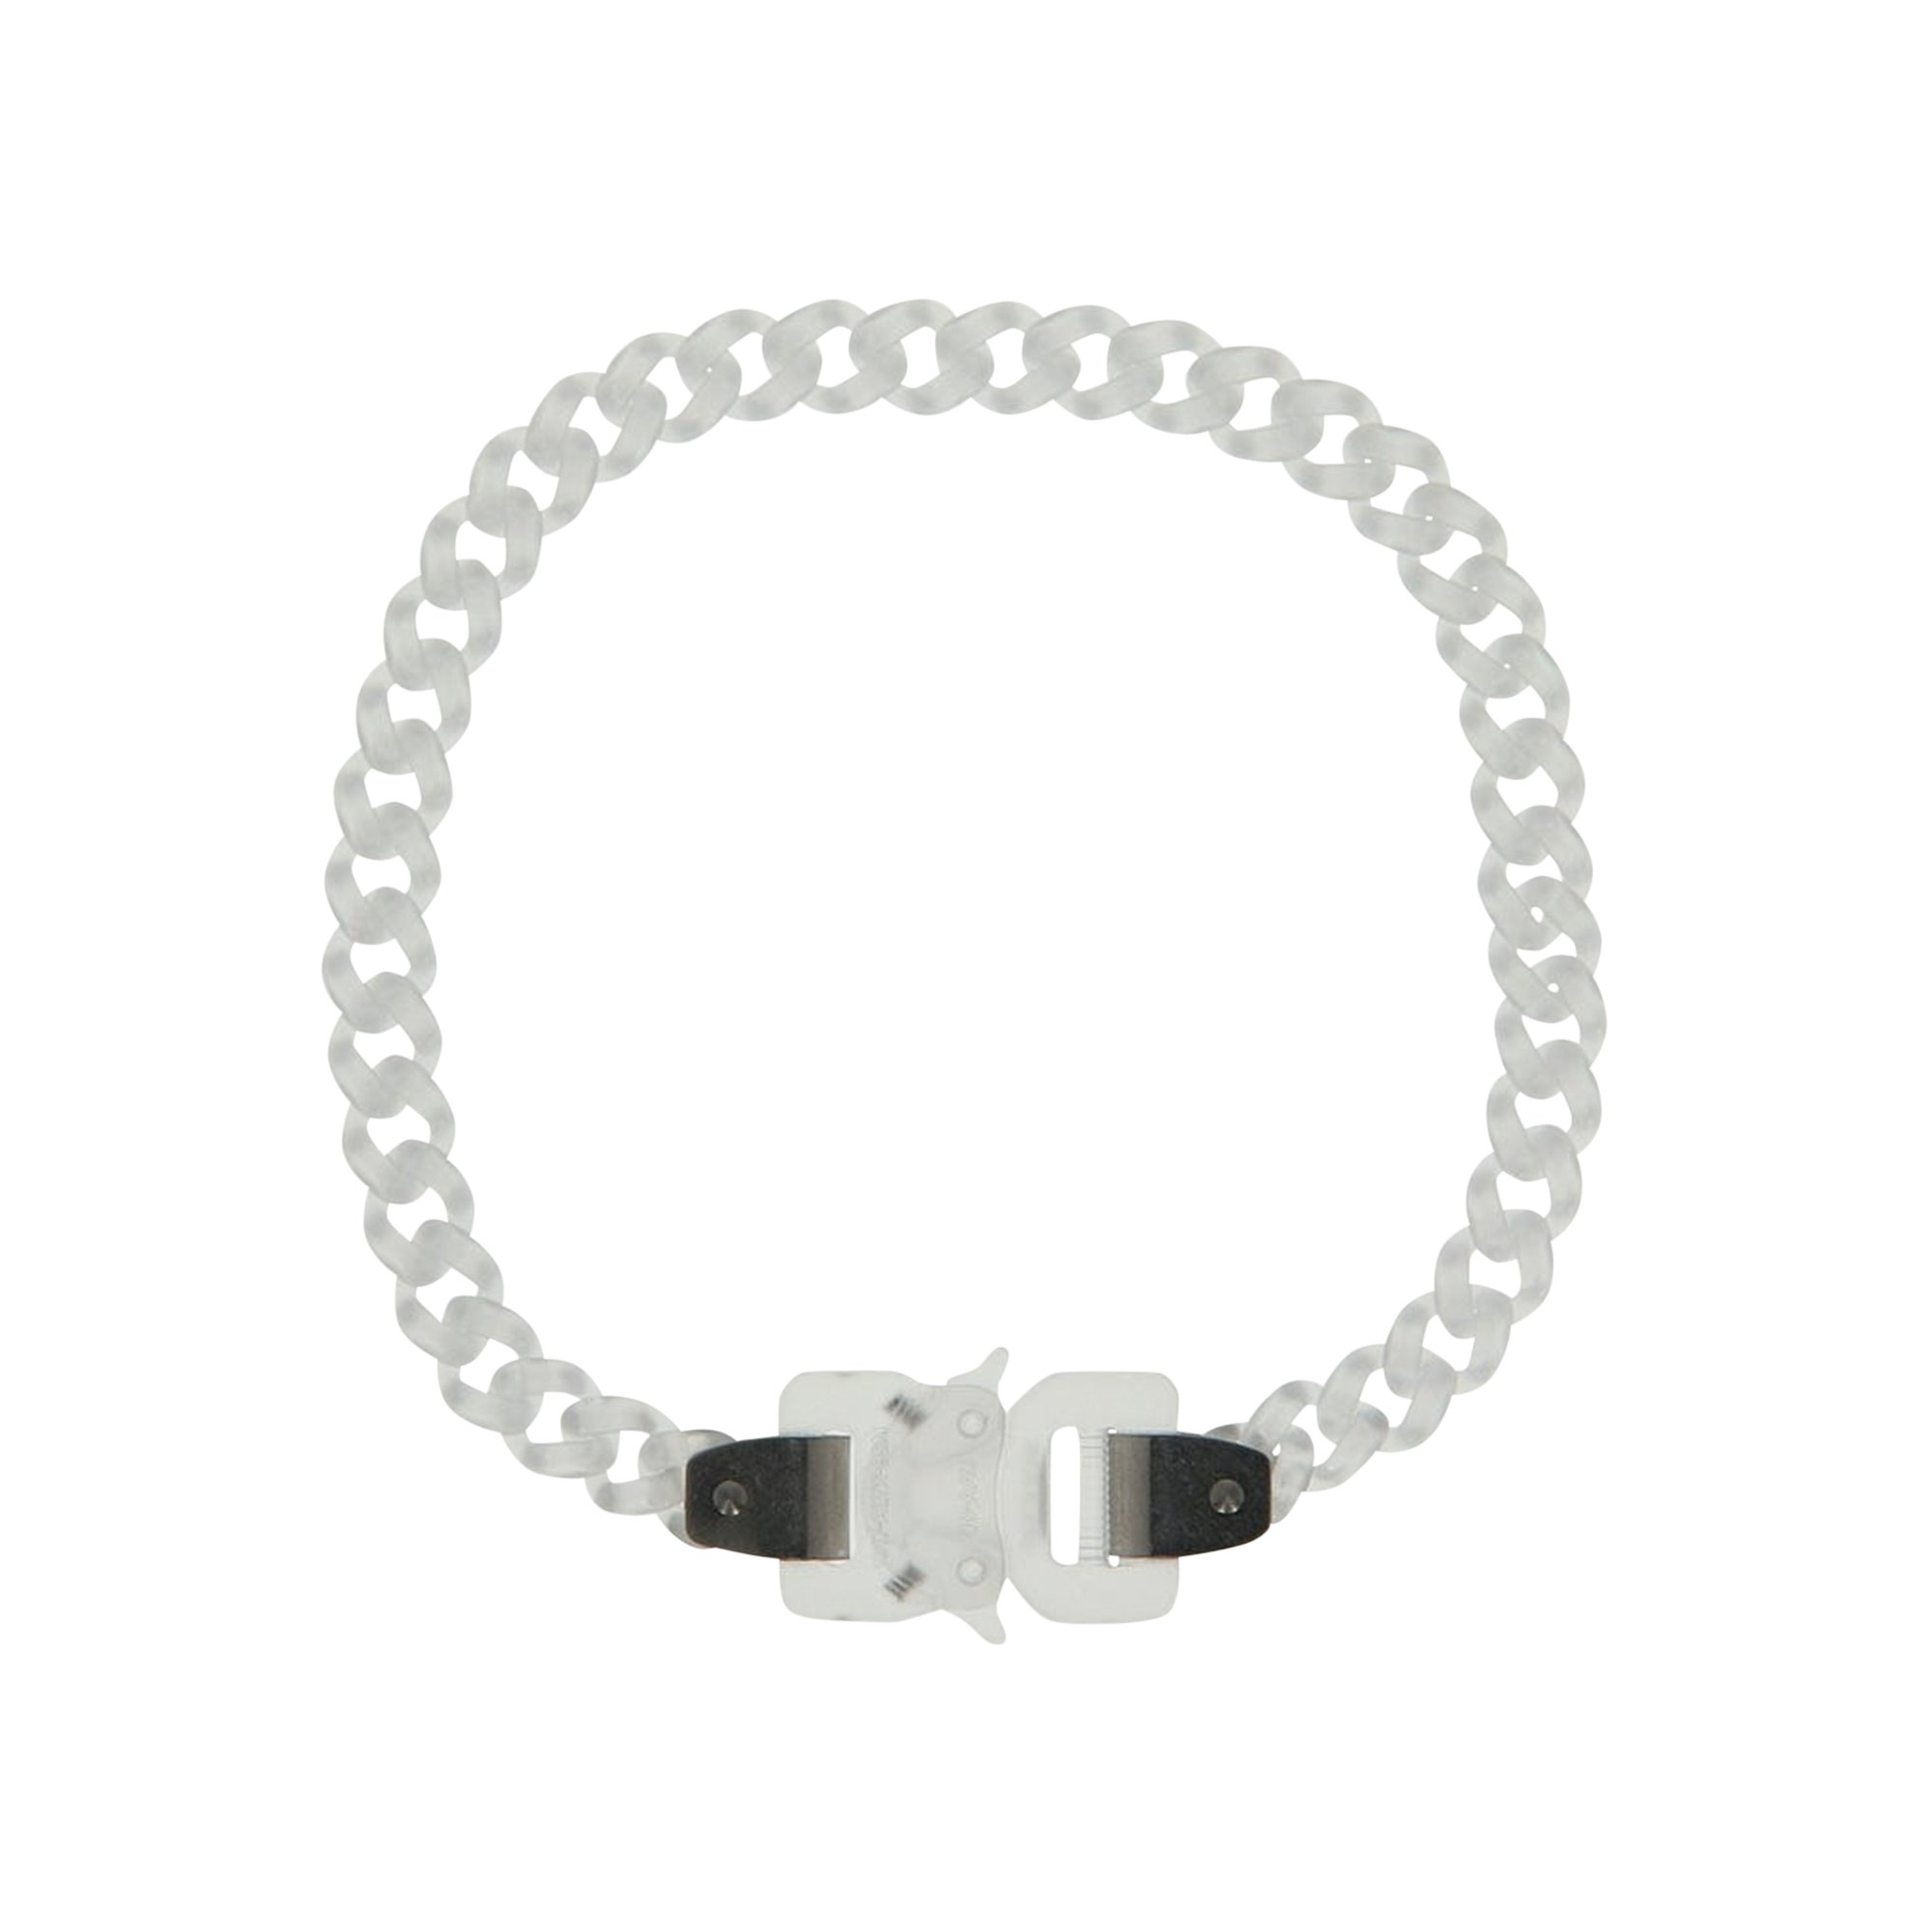 Buy 1017 ALYX 9SM Buckle Necklace 'White' - AAUJW0033OT01 NDE0125